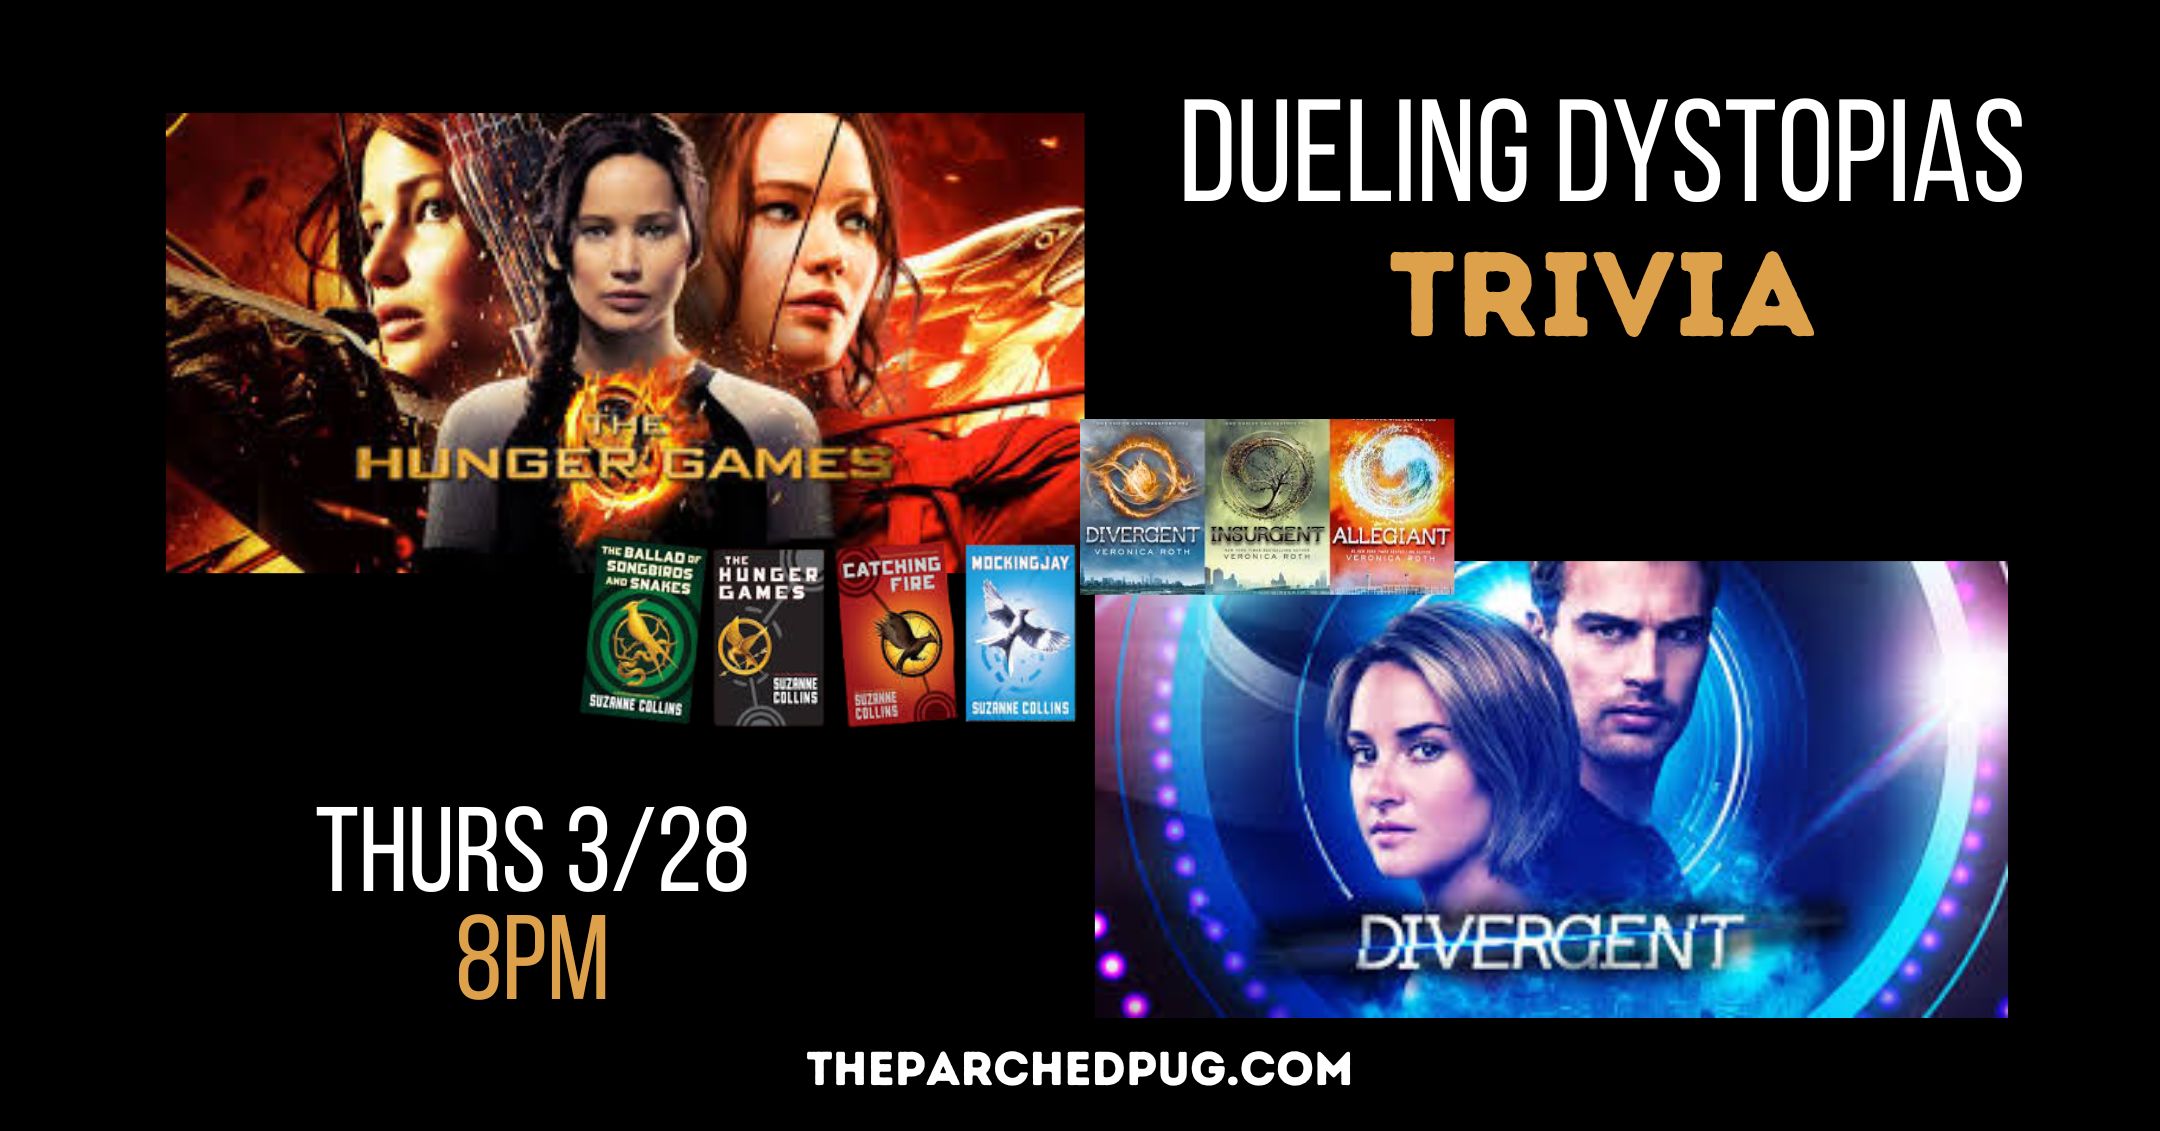 Dueling Dystopias Trivia: Hunger Games Vs Divergent